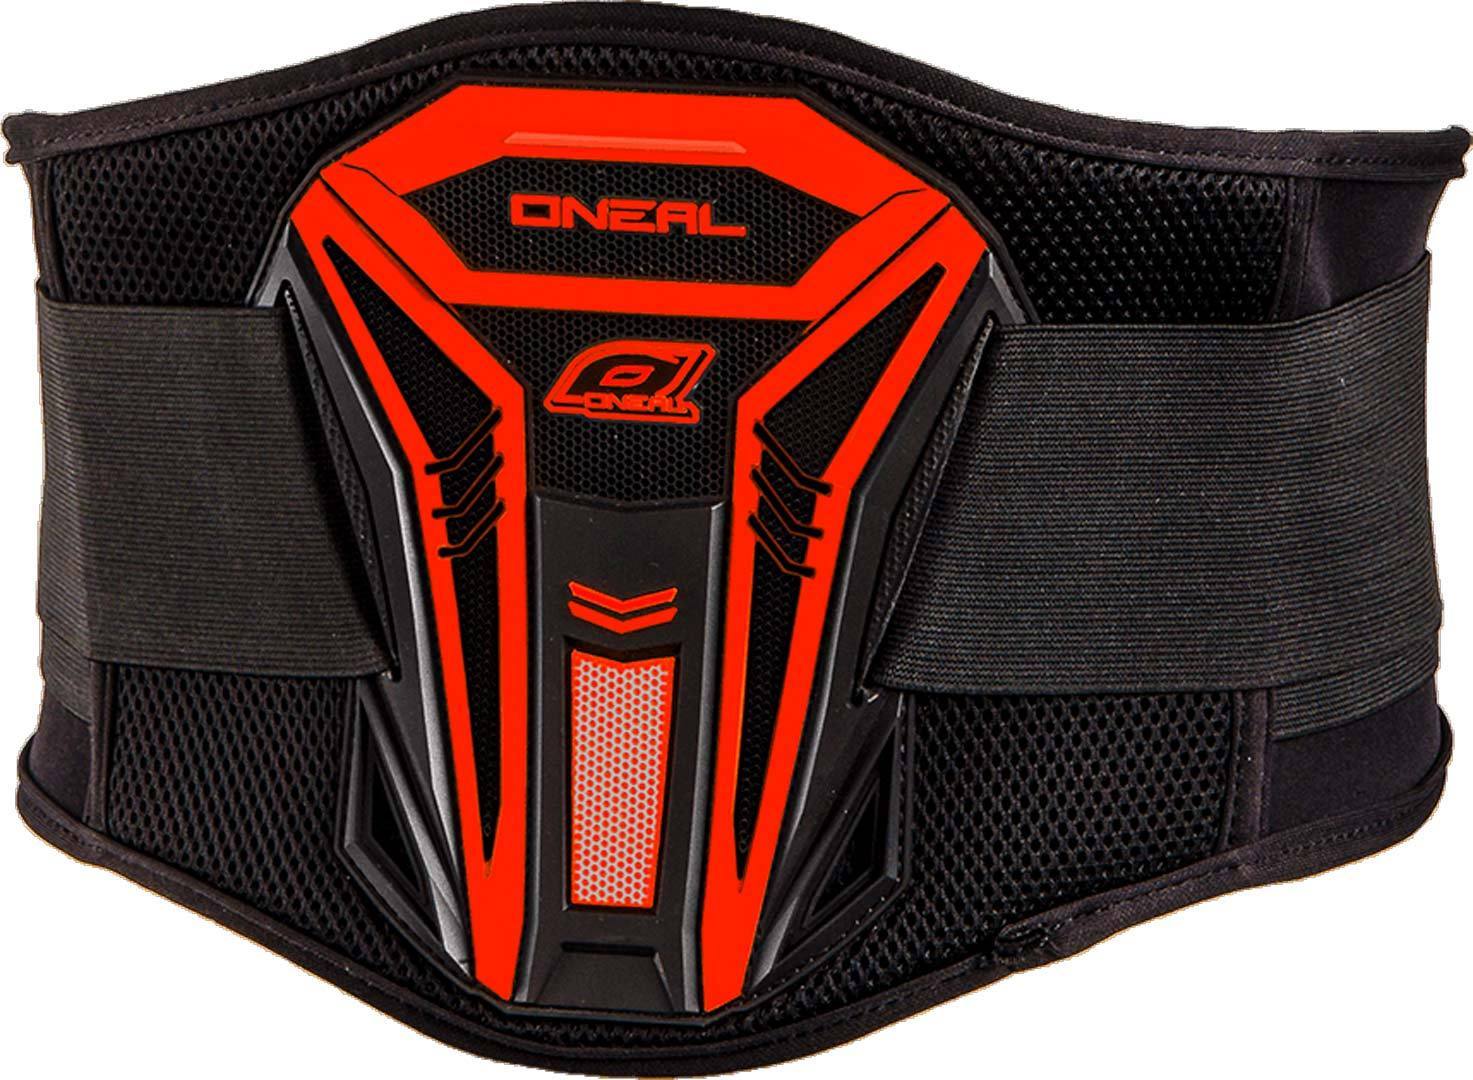 Oneal PXR Kidney Belt, red, Size S M, red, Size S M